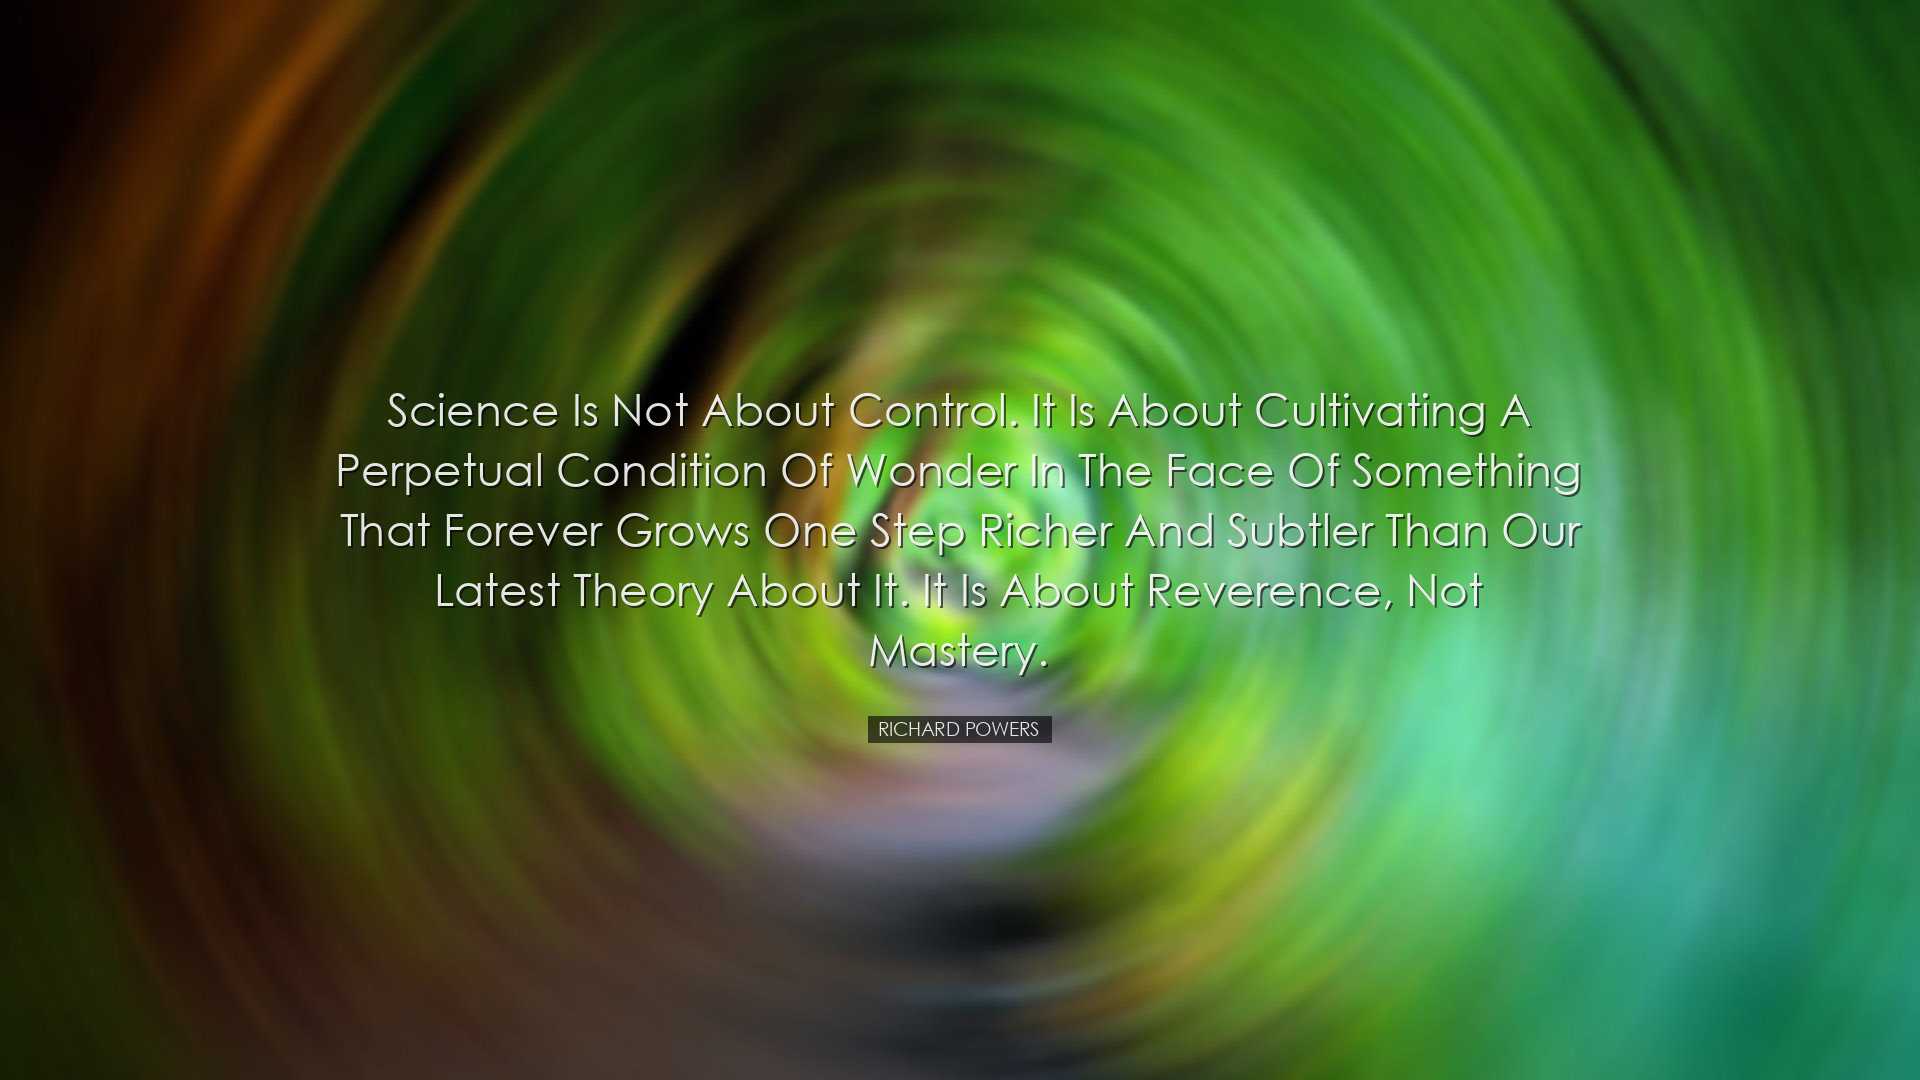 Science is not about control. It is about cultivating a perpetual